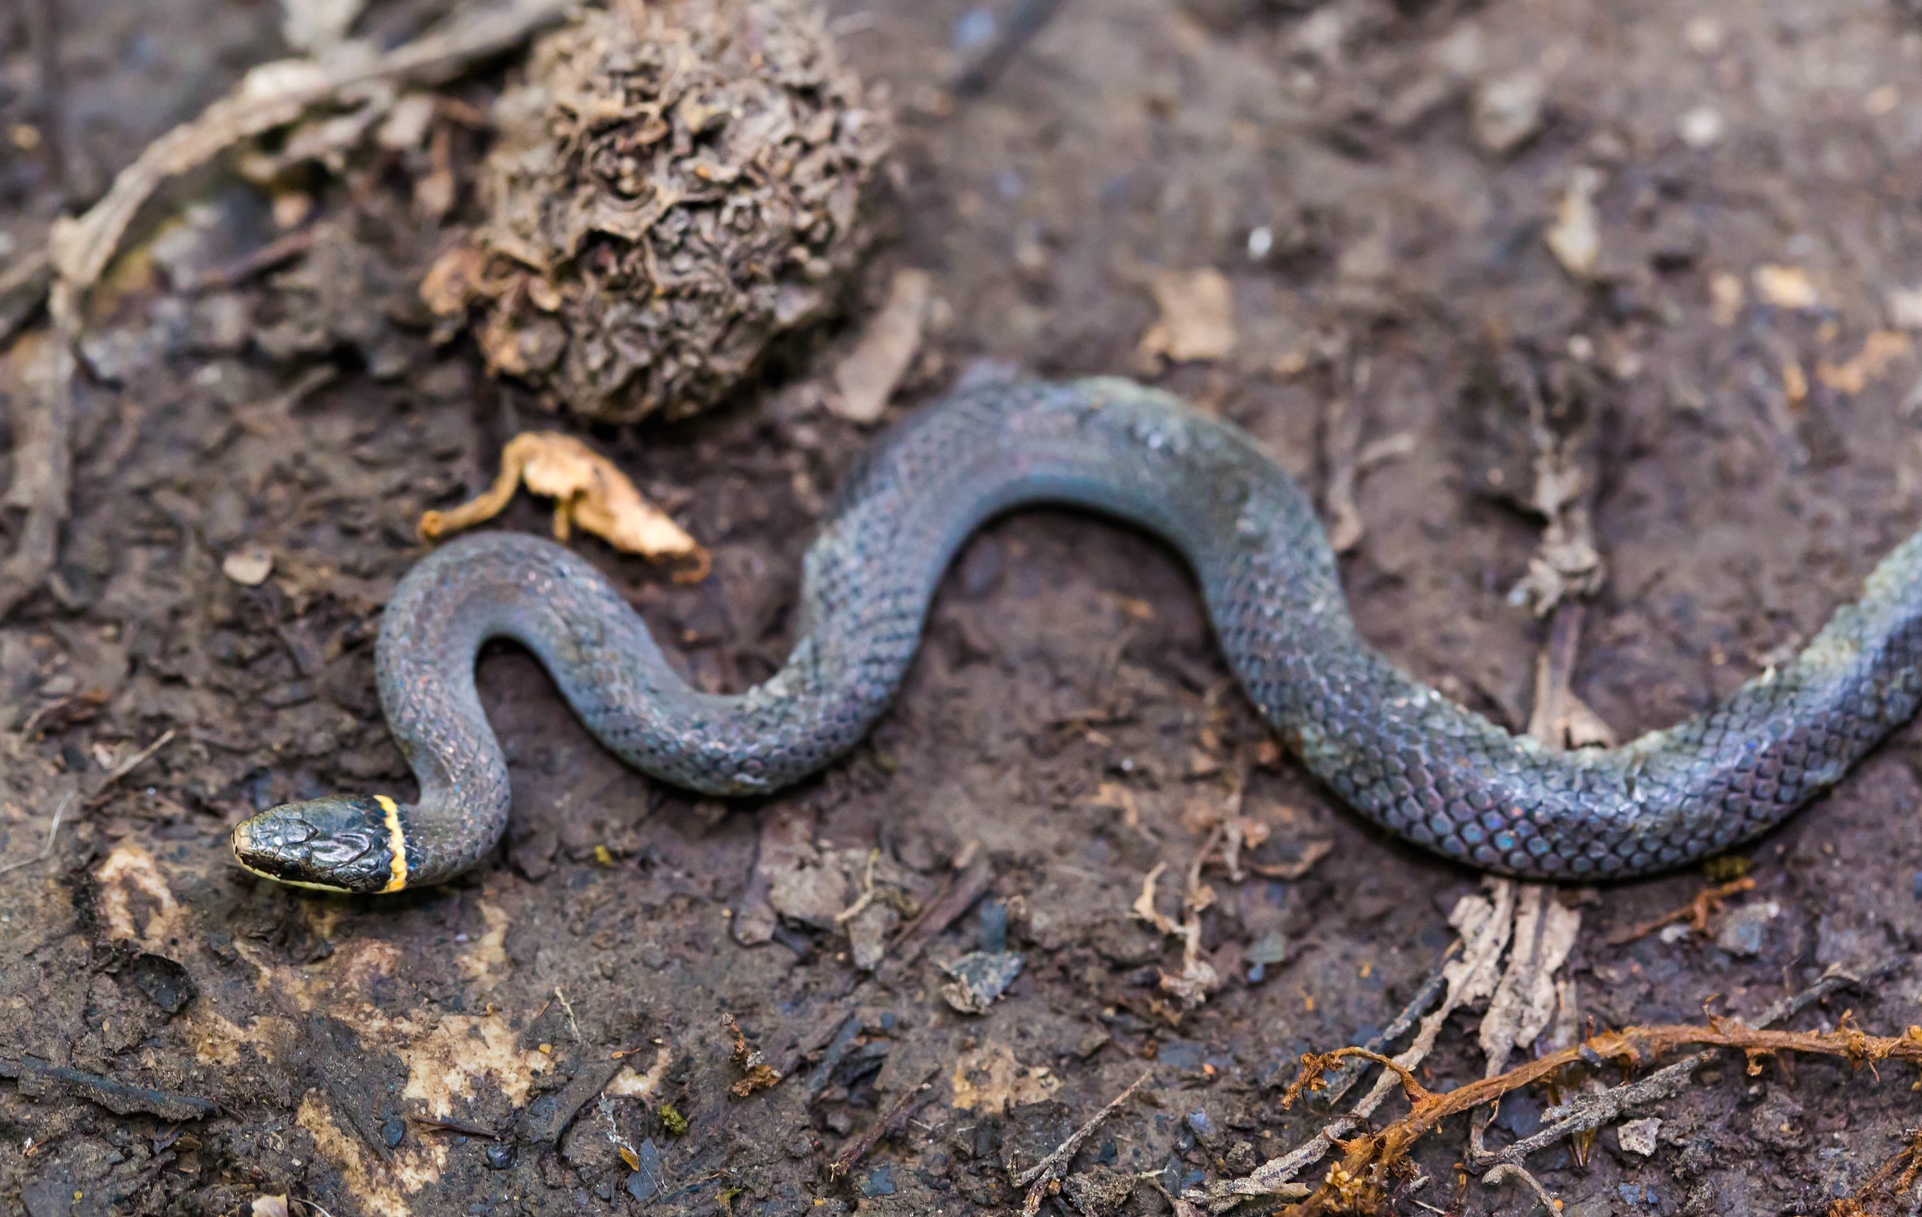 Ring-necked snake in Texas (photo: Melissa McMasters / Flickr)